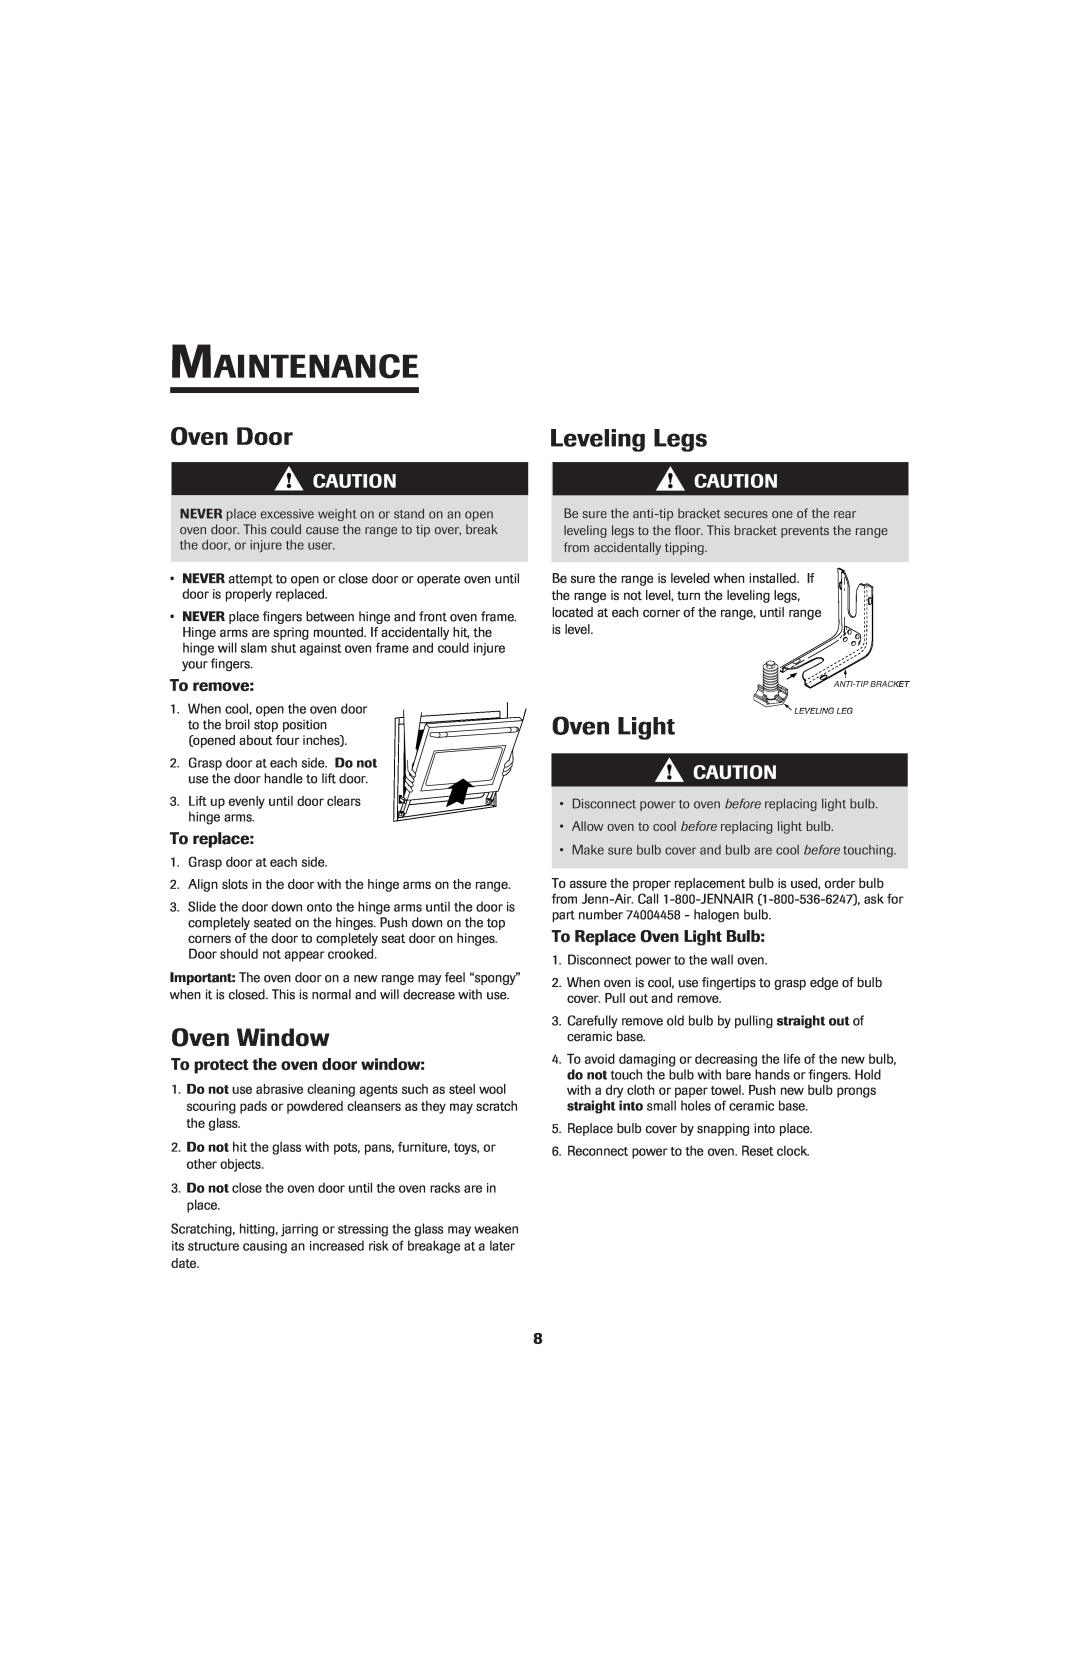 Jenn-Air SLIDE-IN RANGE Maintenance, Oven Door, Leveling Legs, Oven Light, Oven Window, To remove, To replace 